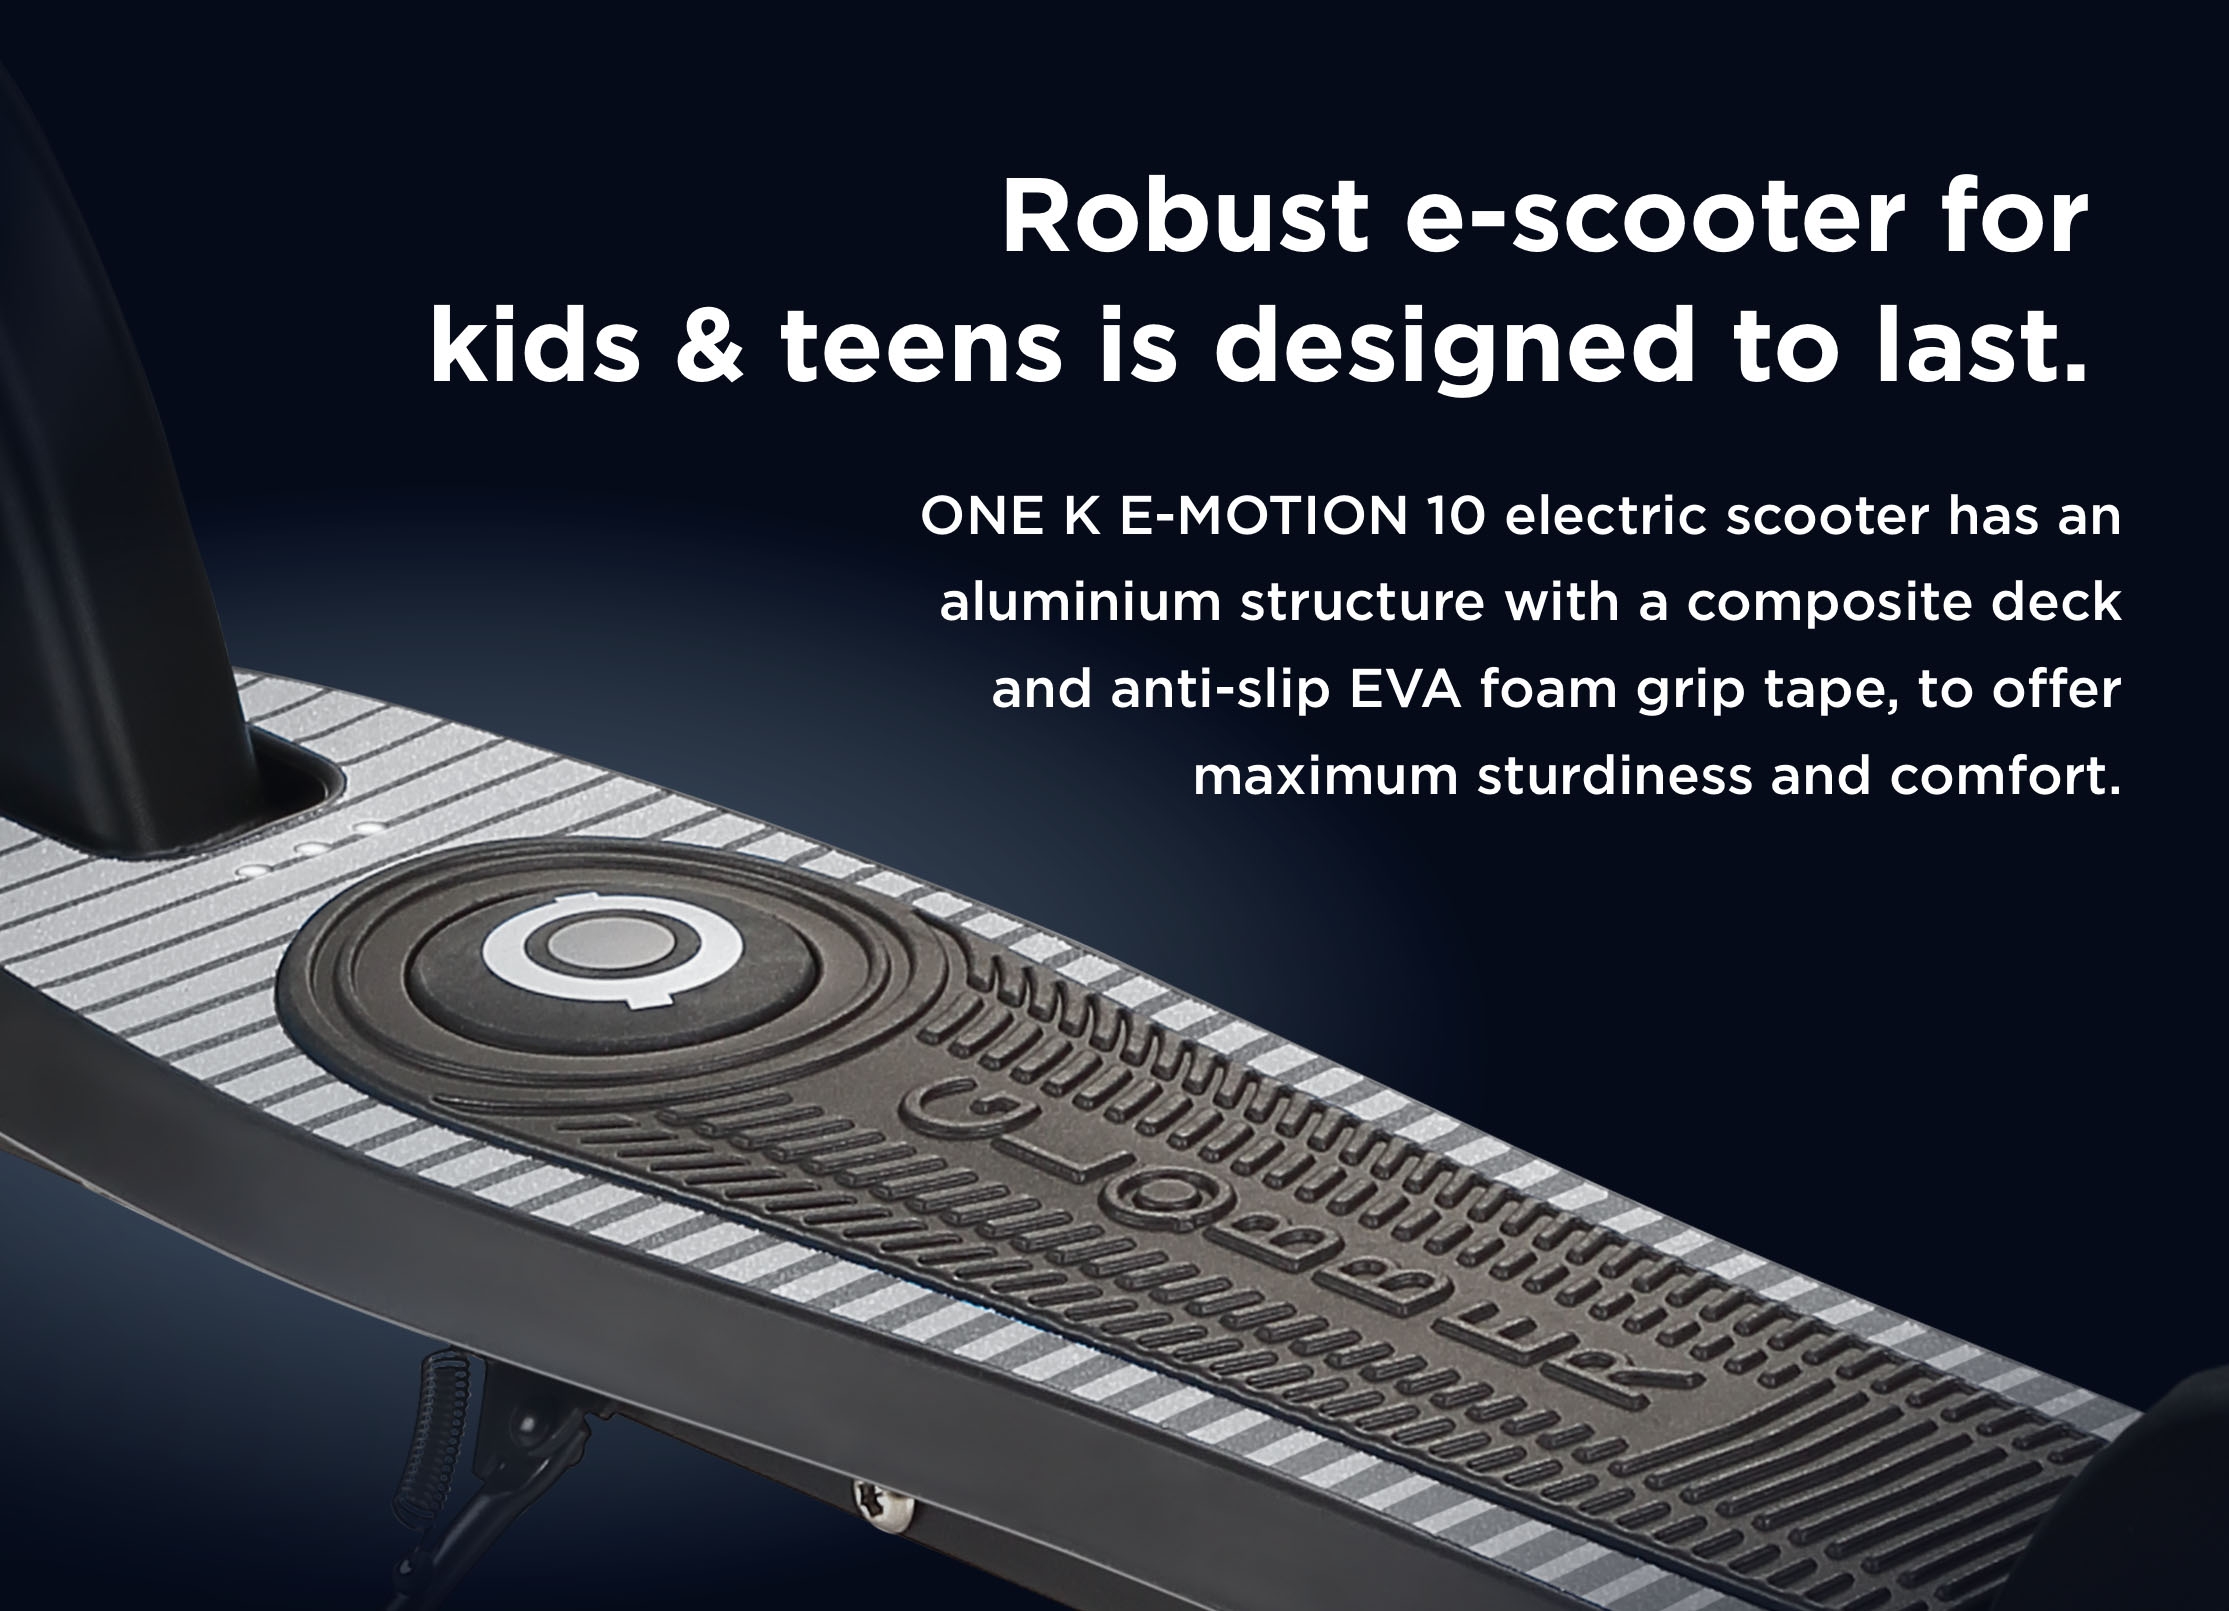 Robust e-scooter for kids & teens is designed to last. ONE K E-MOTION 10 electric scooter has an aluminium structure with a composite deck and anti-slip EVA foam grip tape, to offer maximum sturdiness and comfort. 